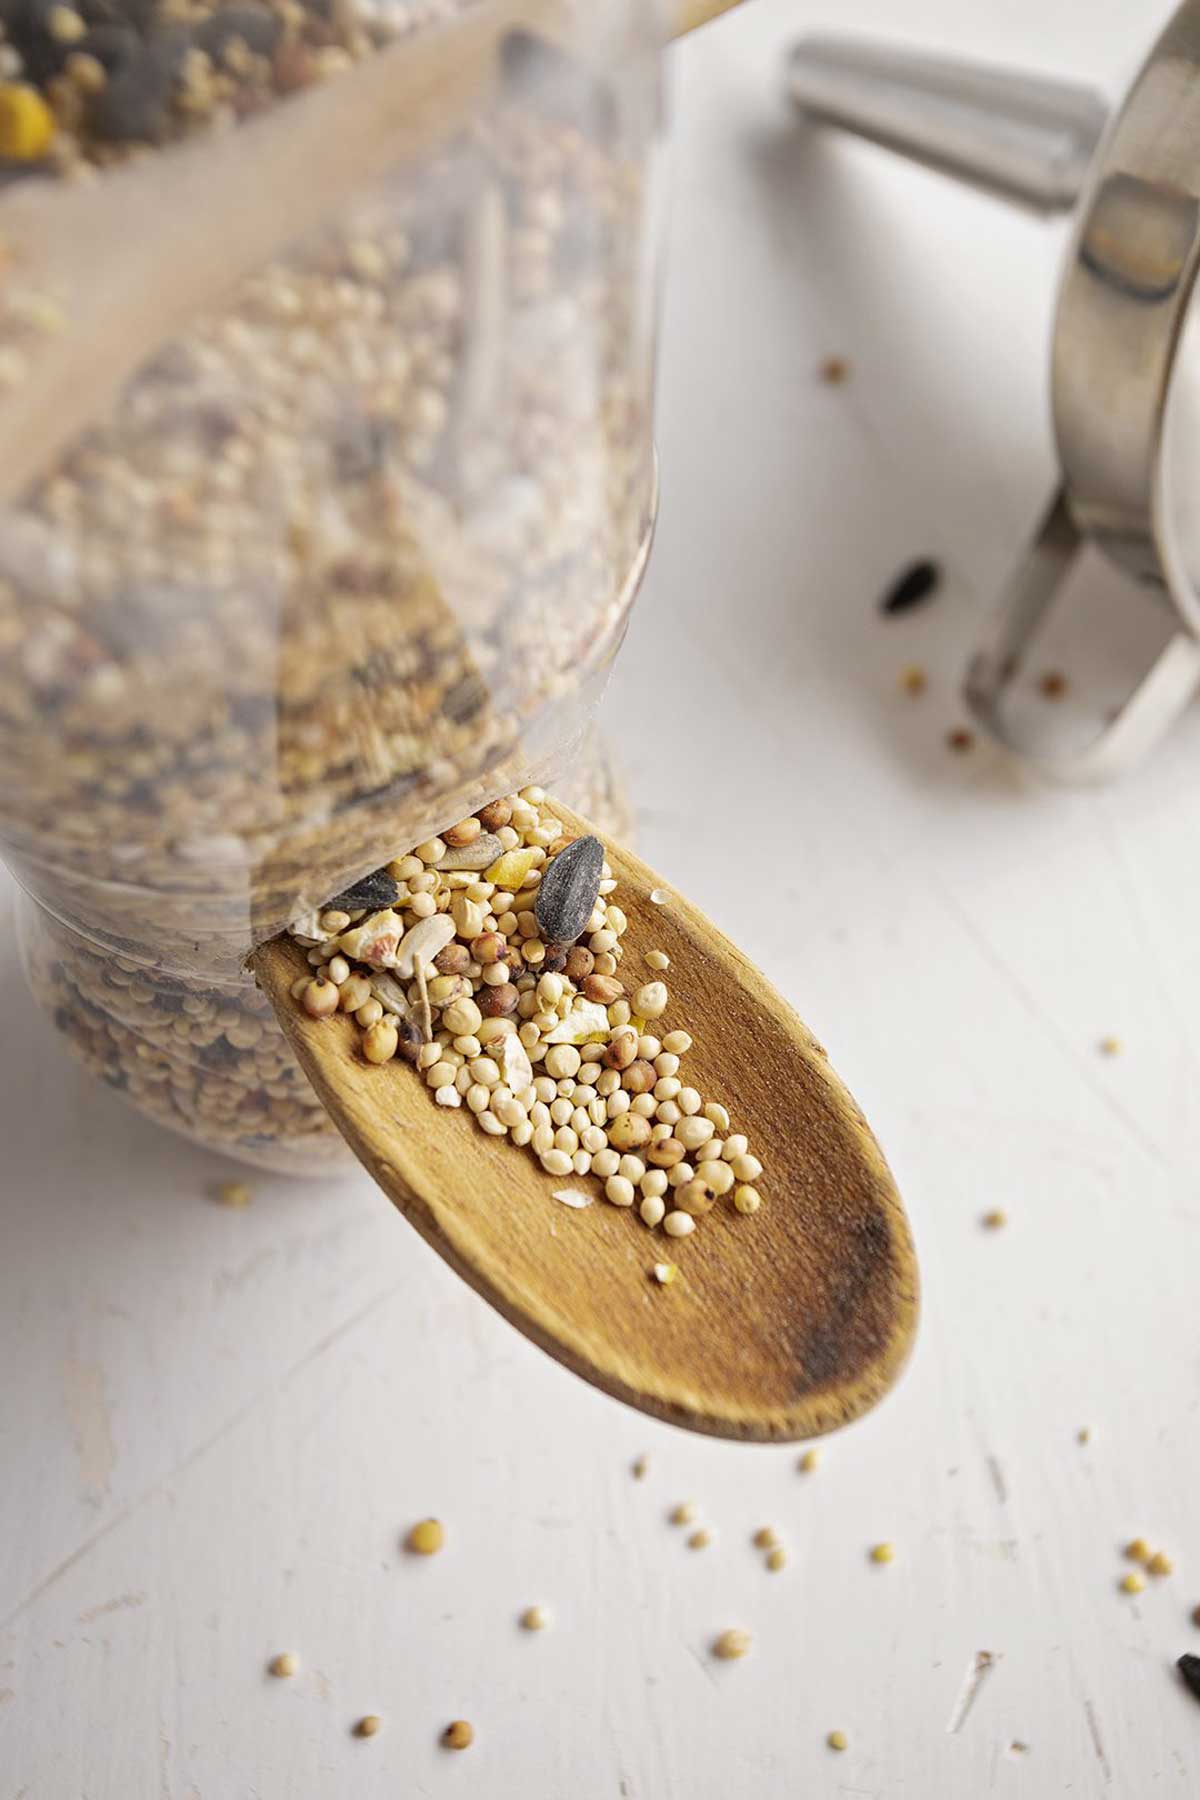 Bird seed falling onto a spoon from a plastic bottle bird feeder, a funnel in the background.